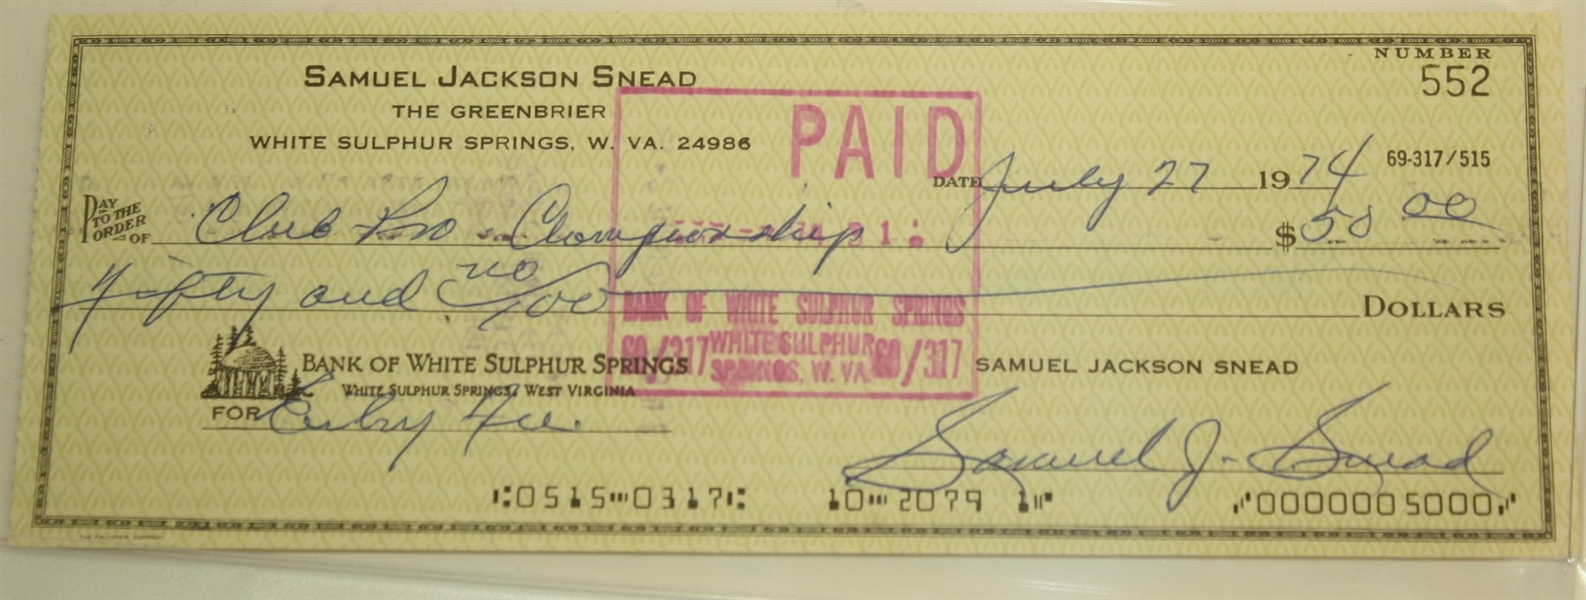 Lot of Two Sam Snead Signed Checks - PSA Encapsulated #83511546 and #83511613